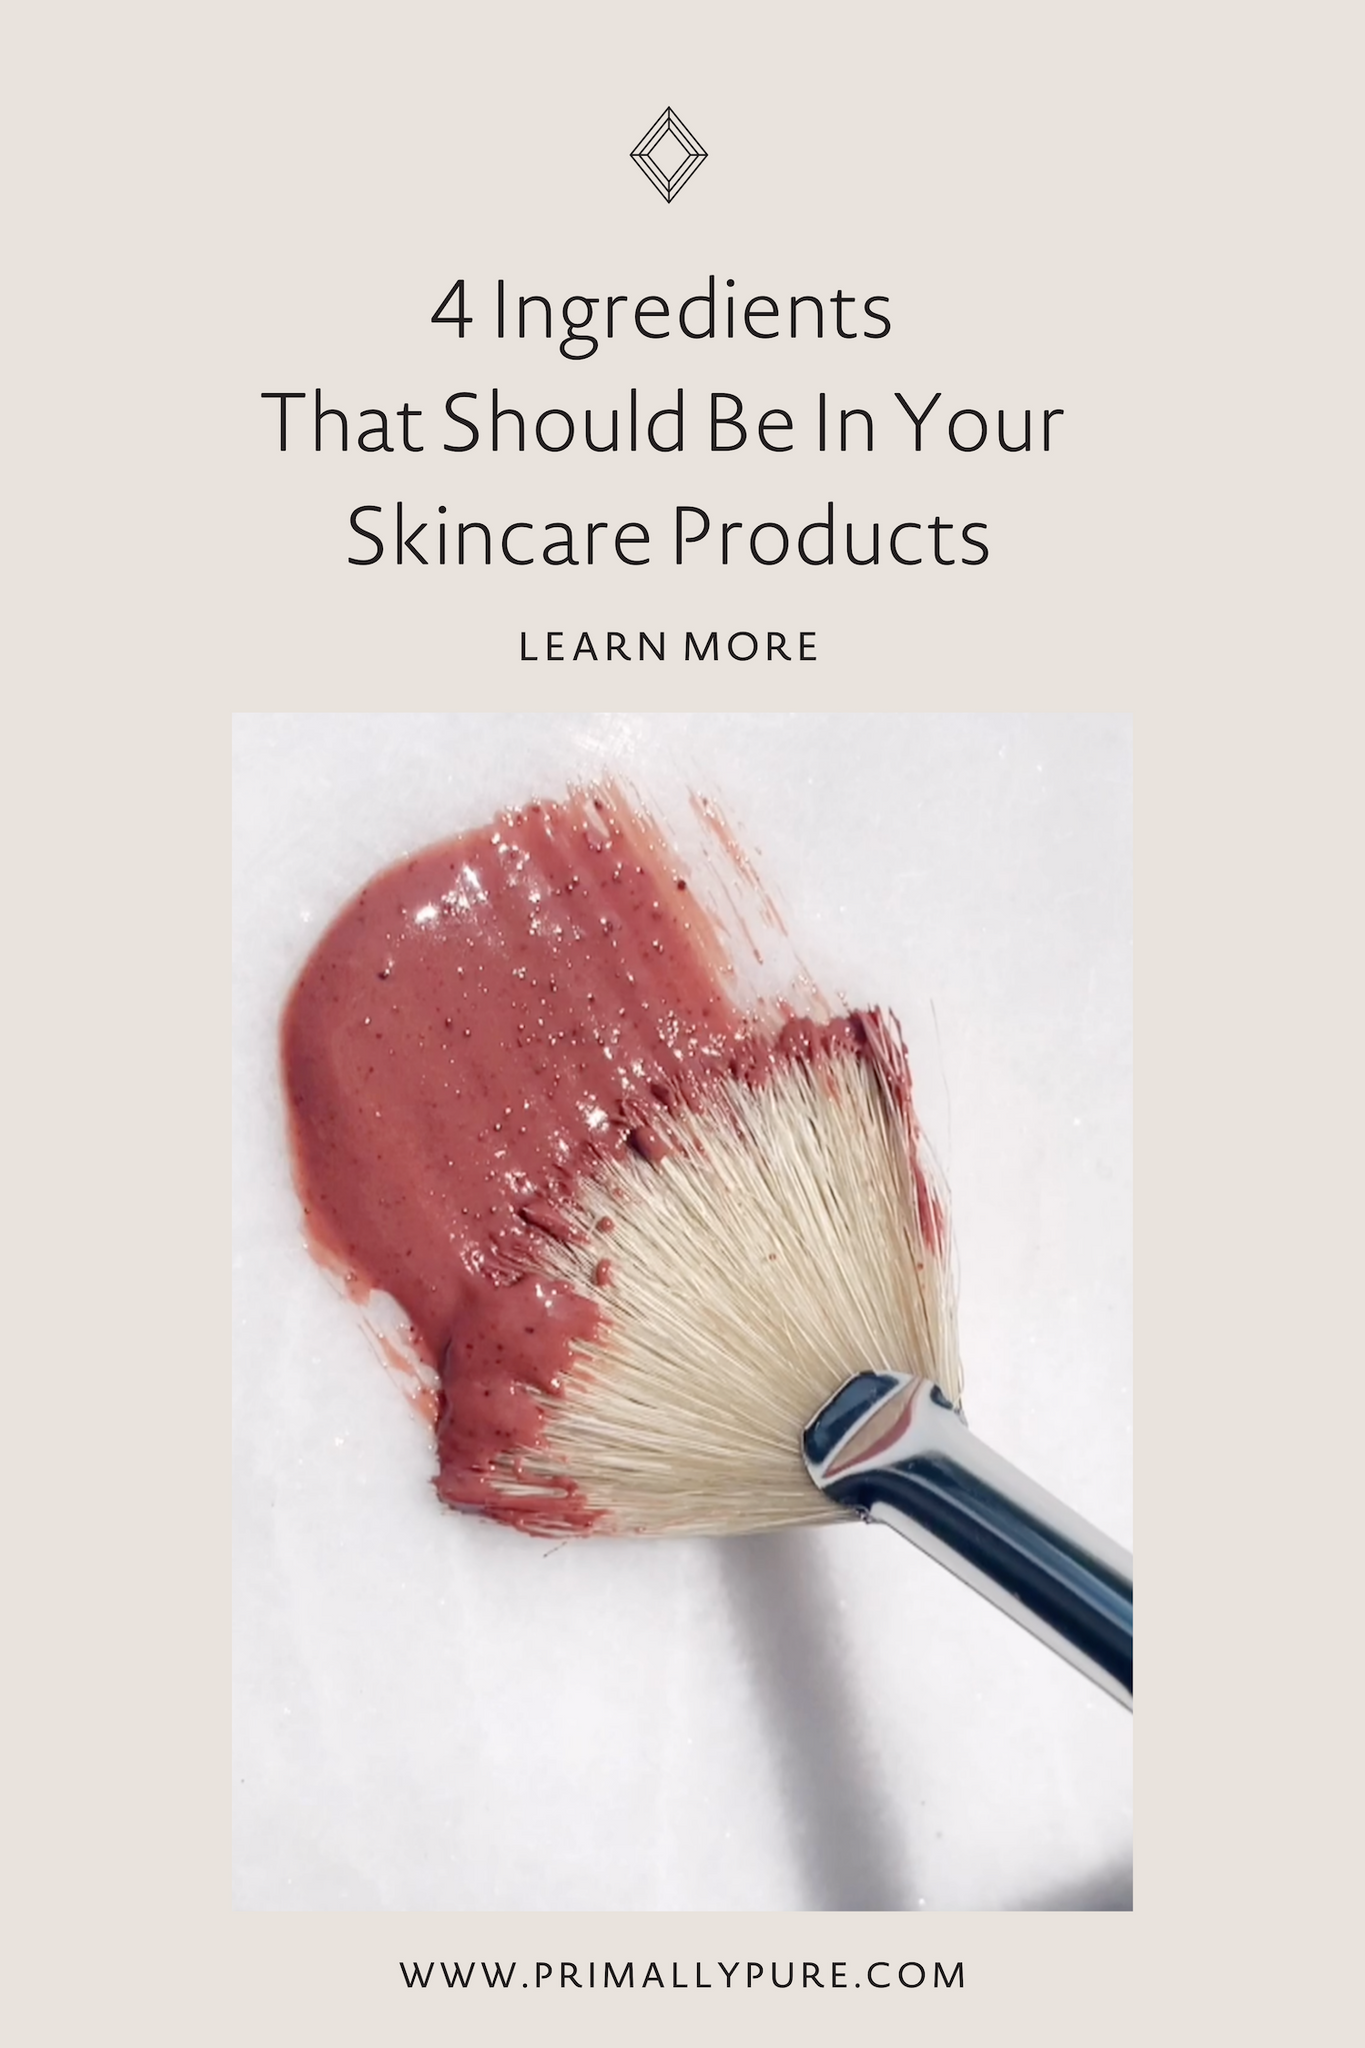 4 Ingredients That Should Be In Your Skincare Products | Primally Pure Skincare